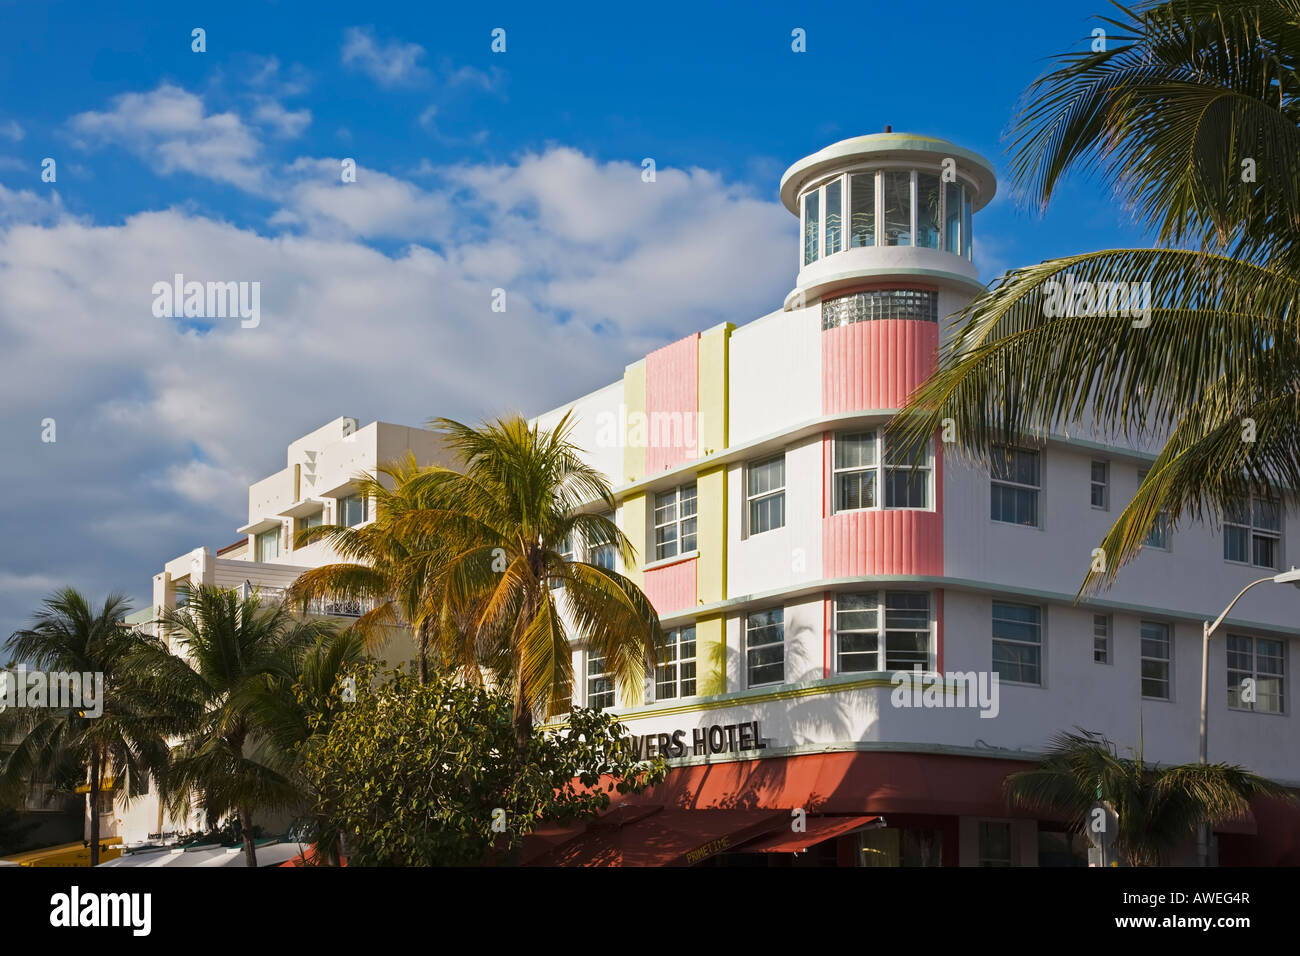 The famous art deco district of Ocean Drive in South Beach Miami Florida United States Stock Photo